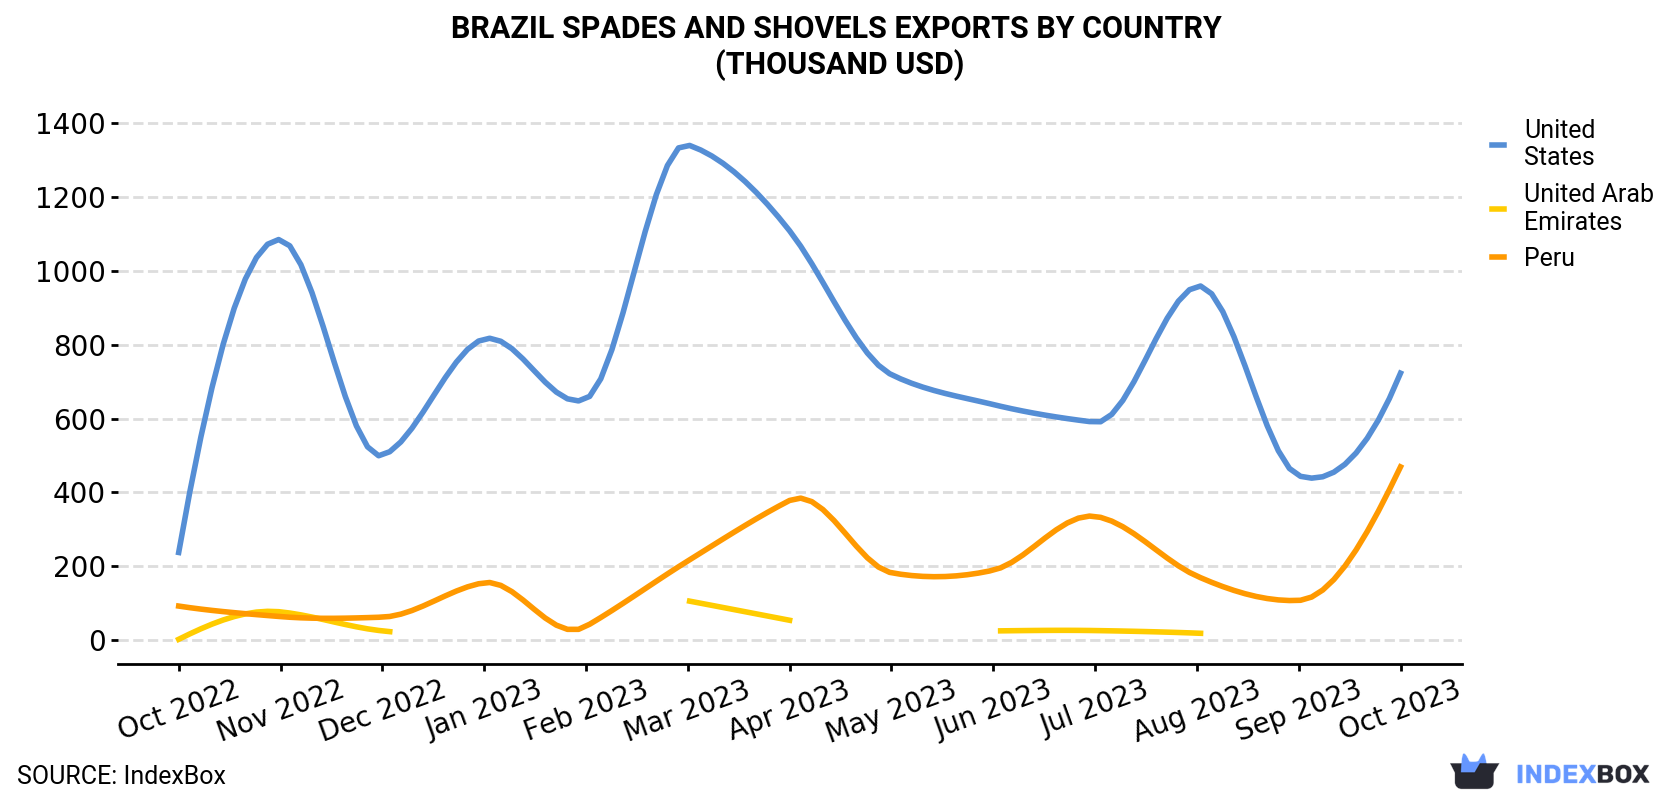 Brazil Spades And Shovels Exports By Country (Thousand USD)